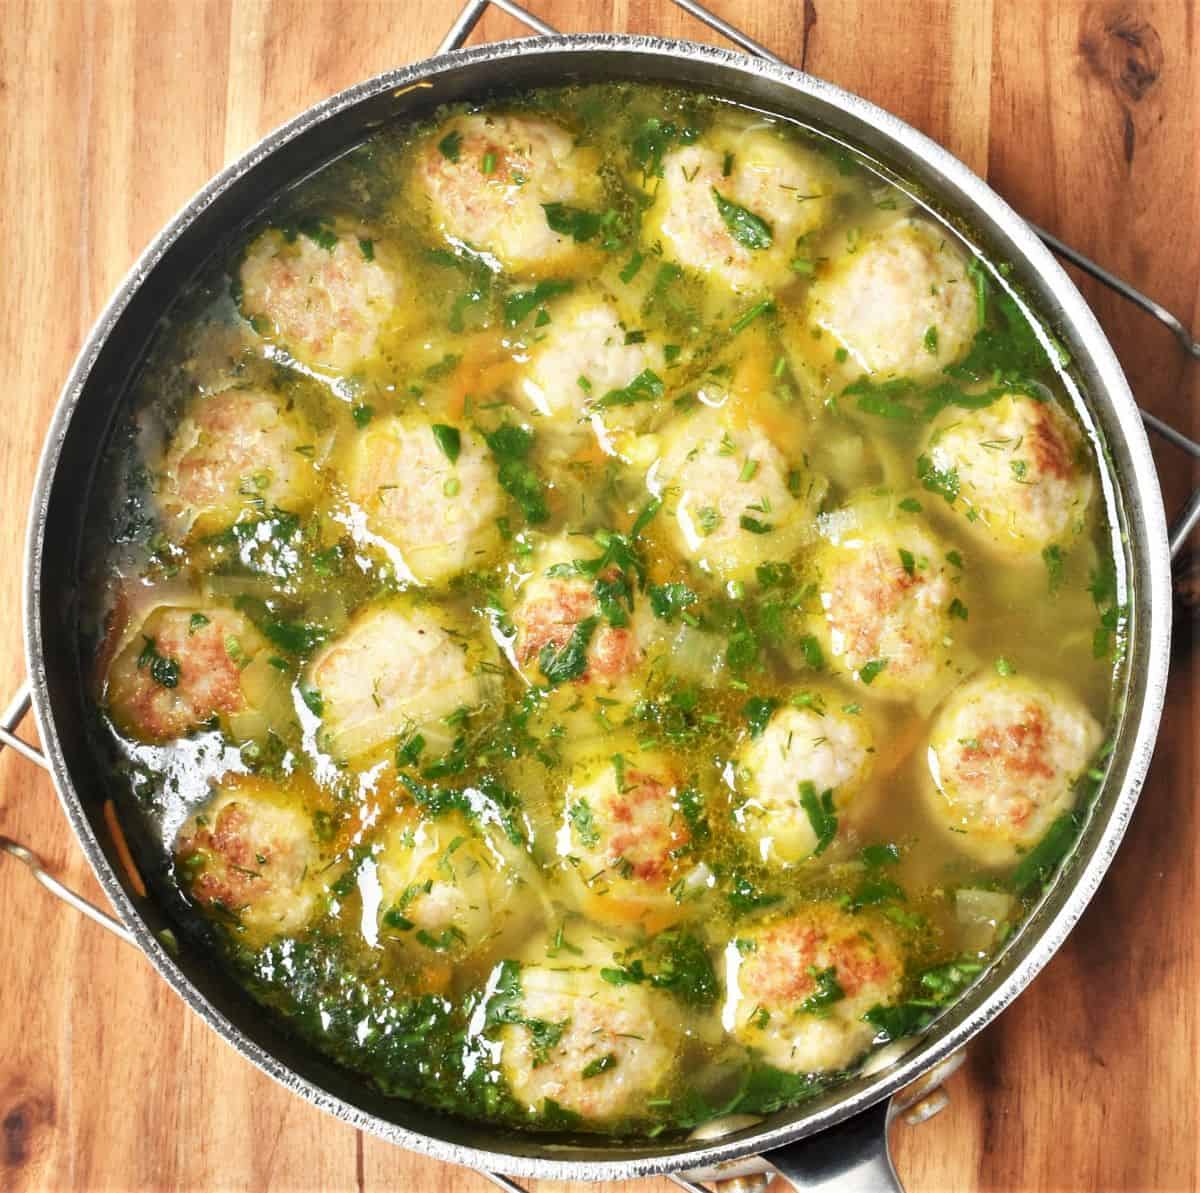 Soup with meatballs and herbs in large pot.